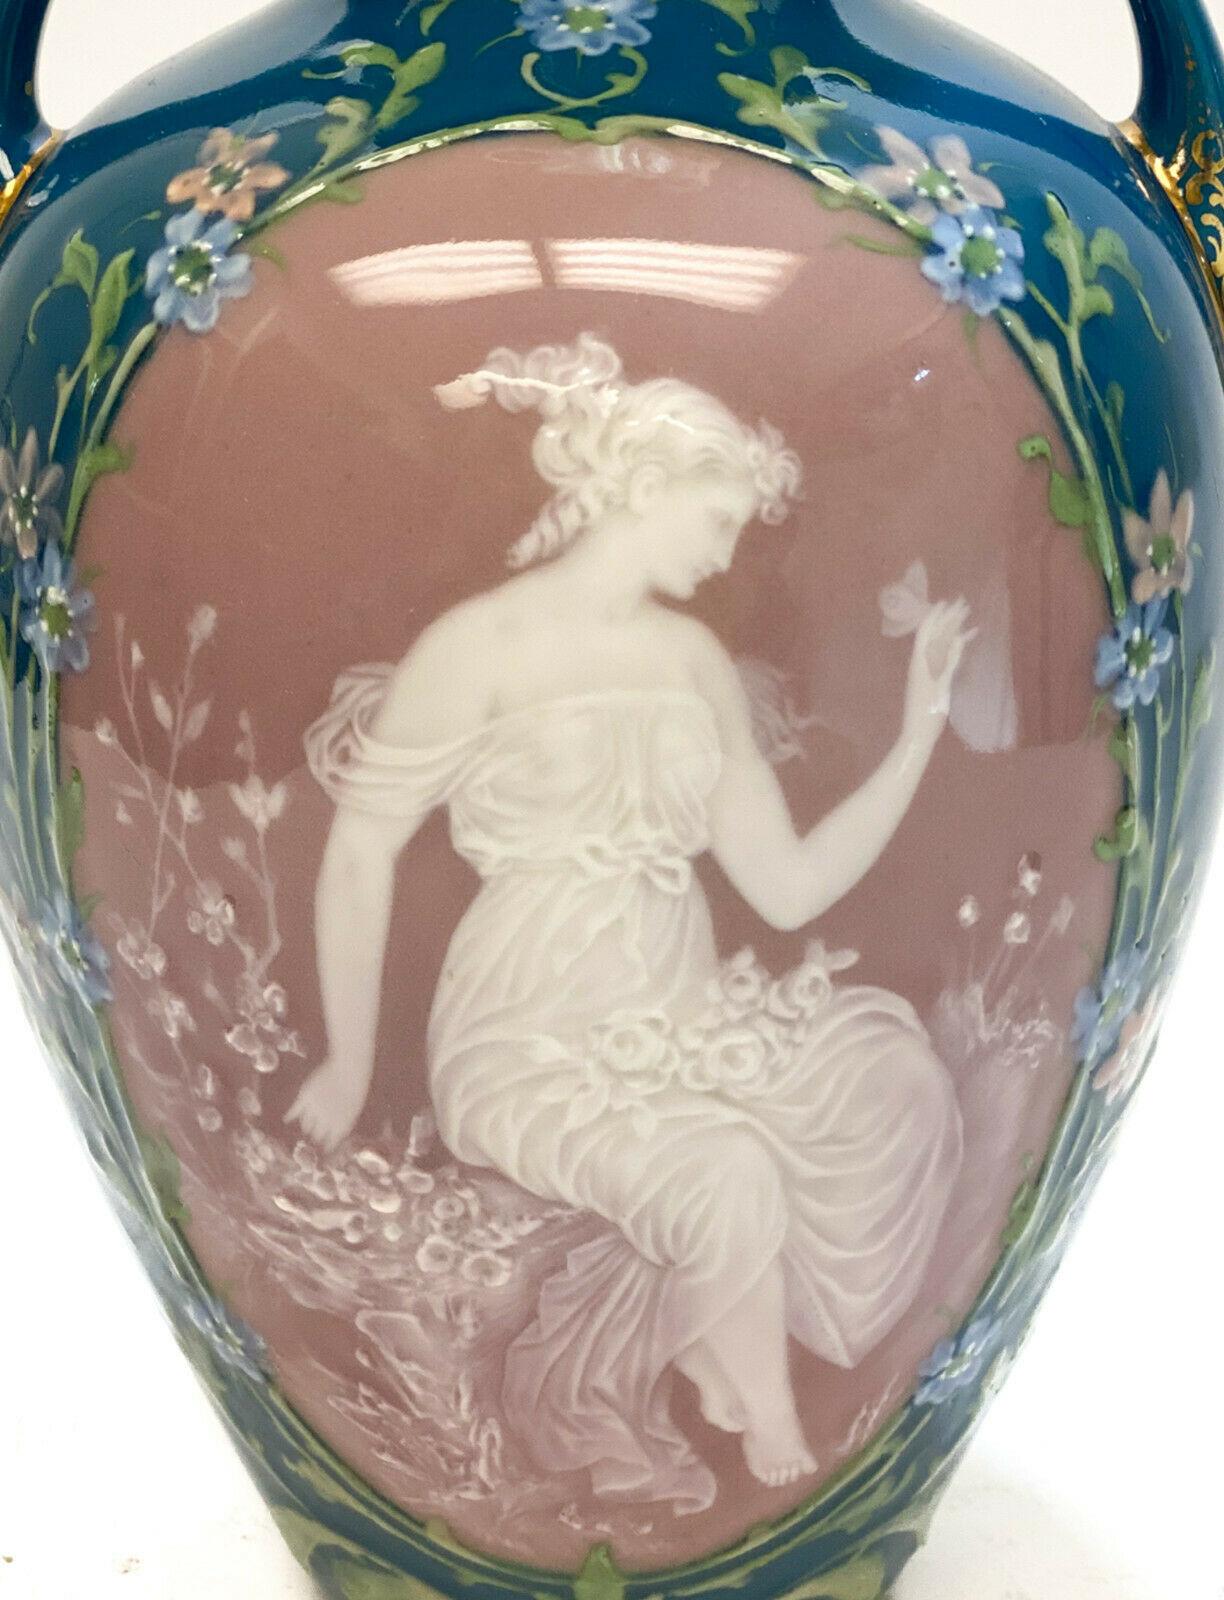 Austrian pate-sur-pate porcelain twin handled vase. A fine quality pate-sur-pate figural beauty in delicate garbs. A teal blue ground with the middle in white slip and multicolored slip decorations to the edges. Austrian pate-sur-pate mark to the